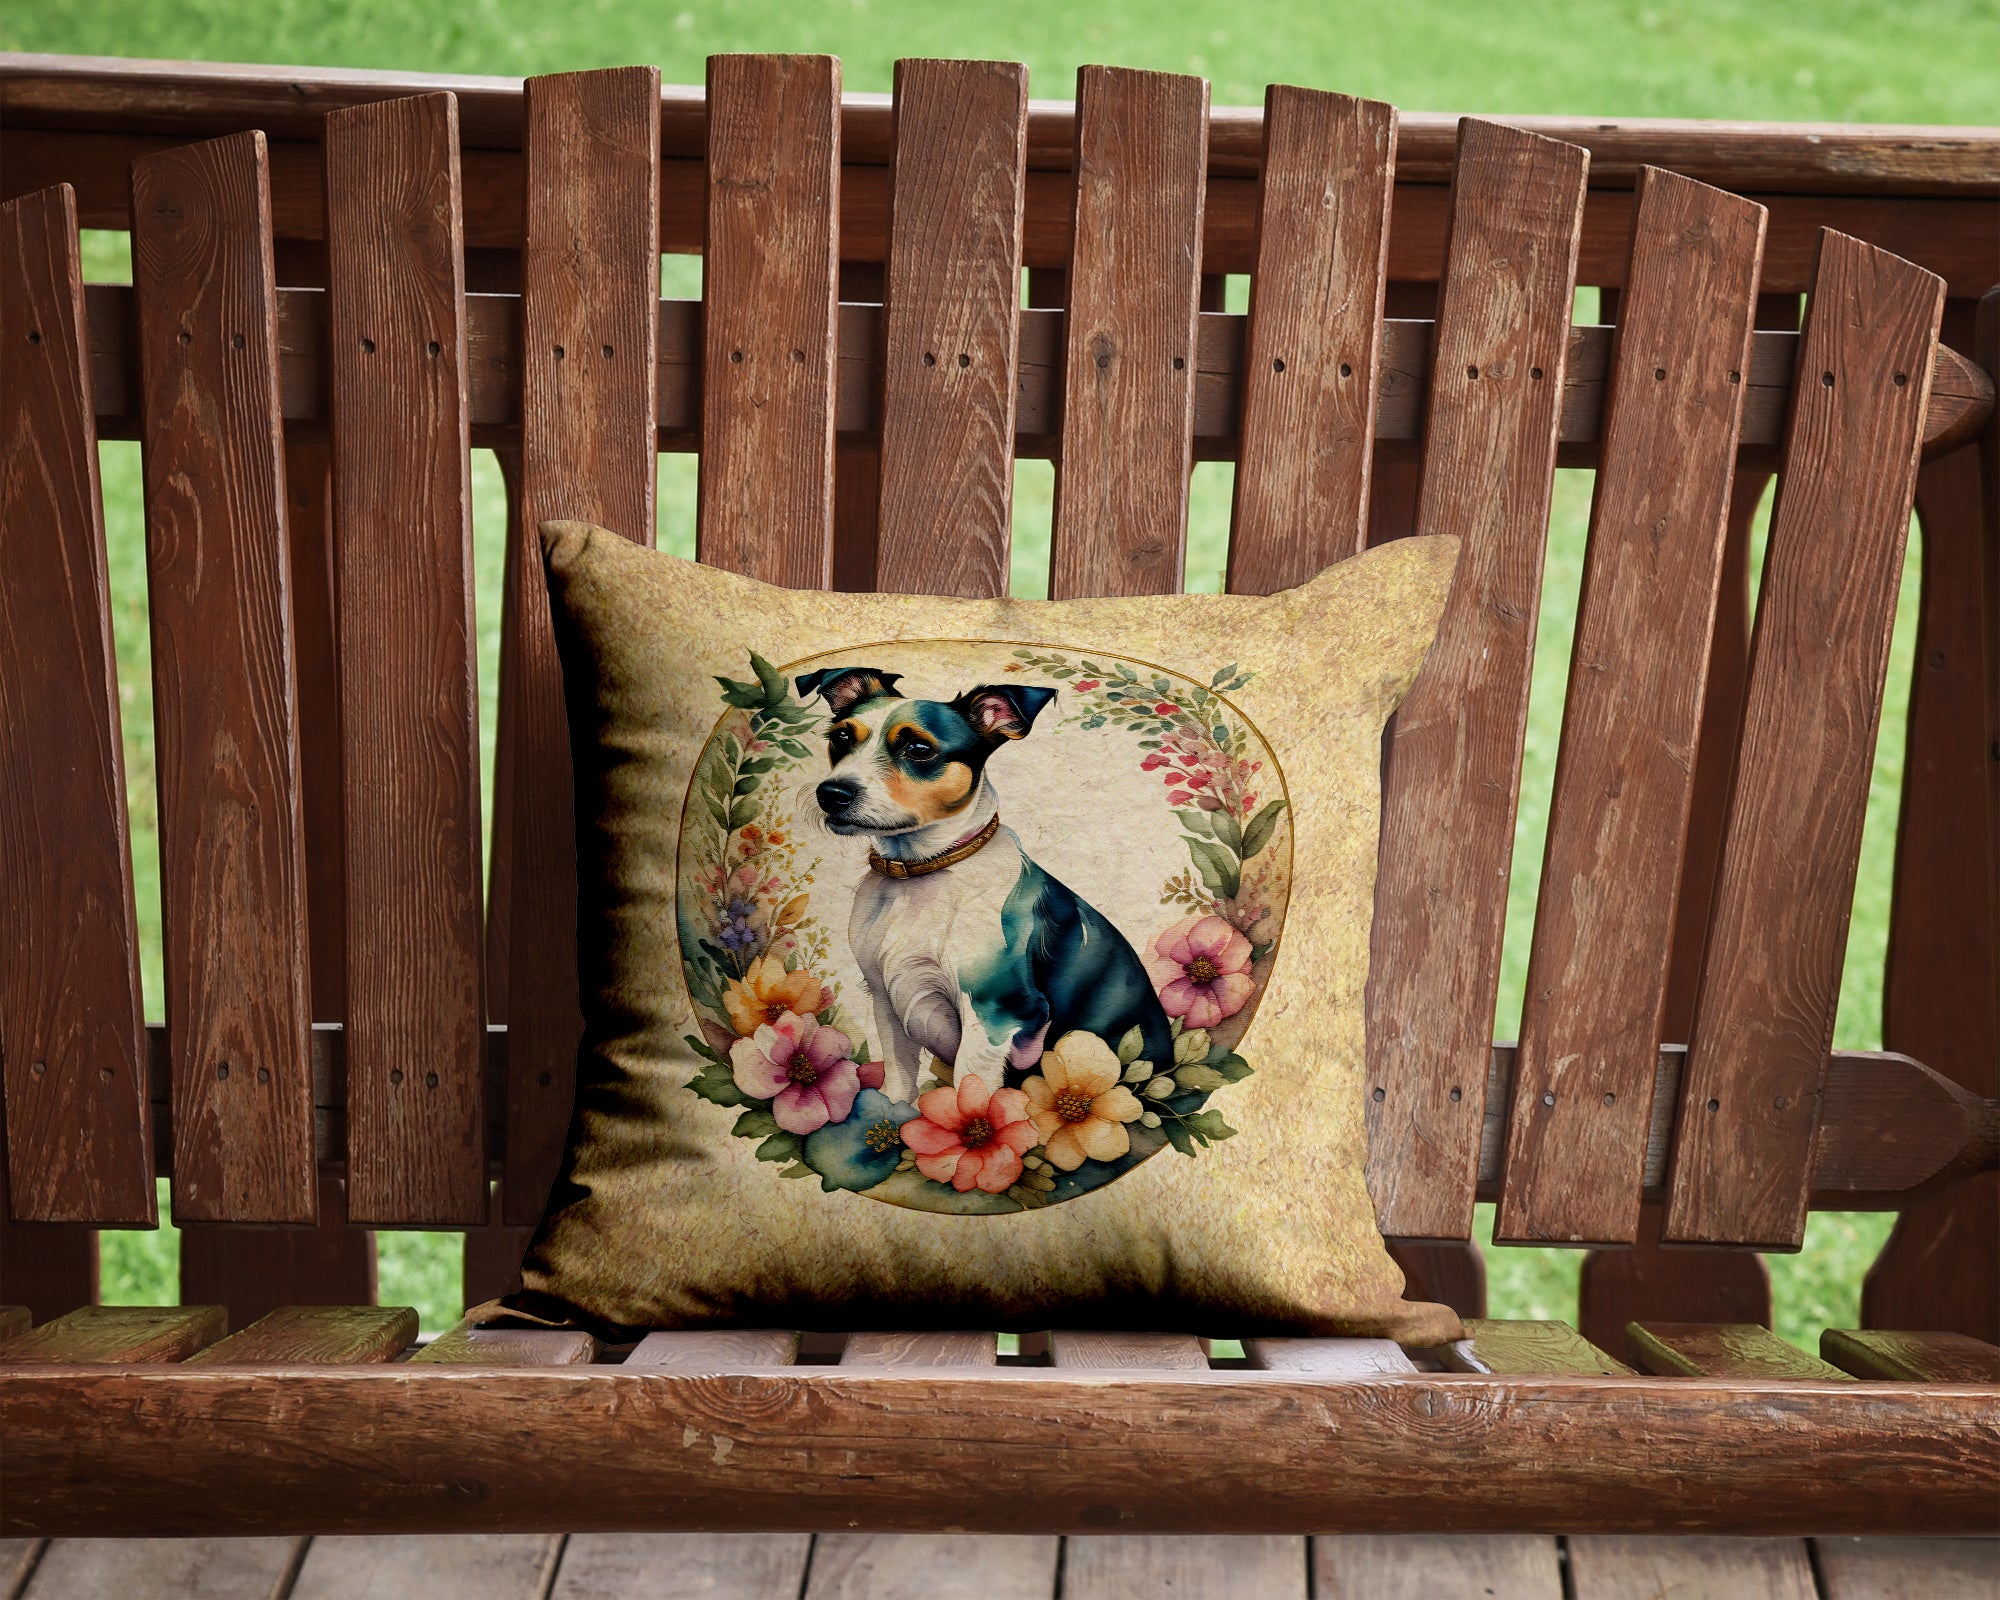 Buy this Jack Russell Terrier and Flowers Fabric Decorative Pillow